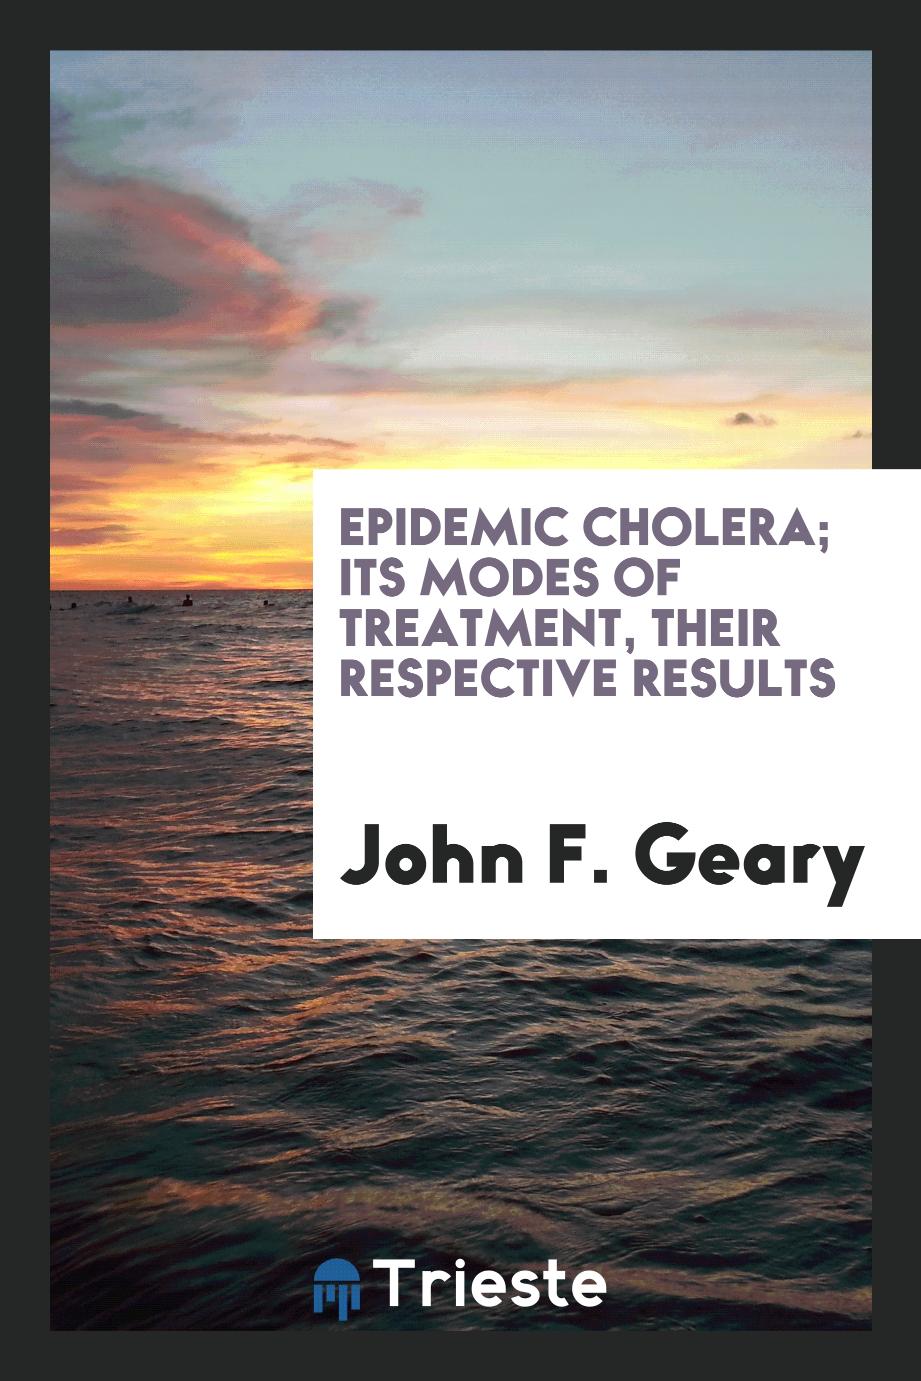 Epidemic cholera; its modes of treatment, their respective results